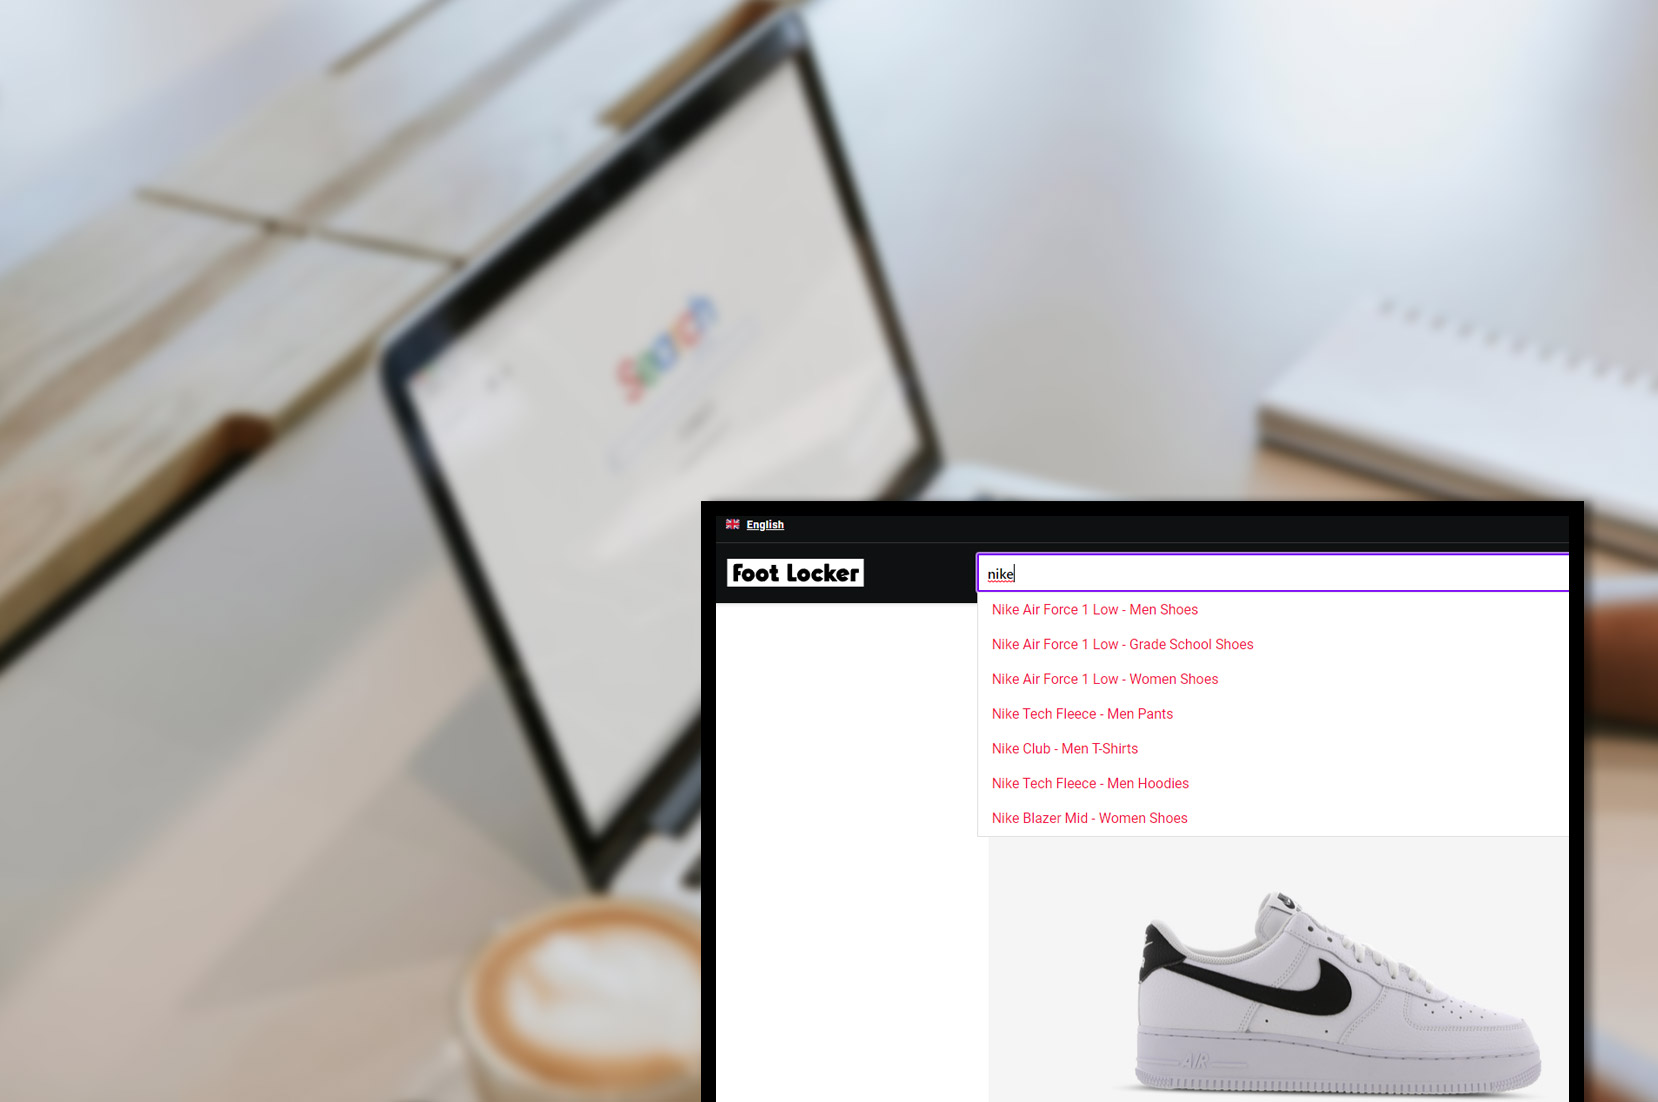 footlocker-co-ukproduct-categories-keywords-and-brand-scraping-services